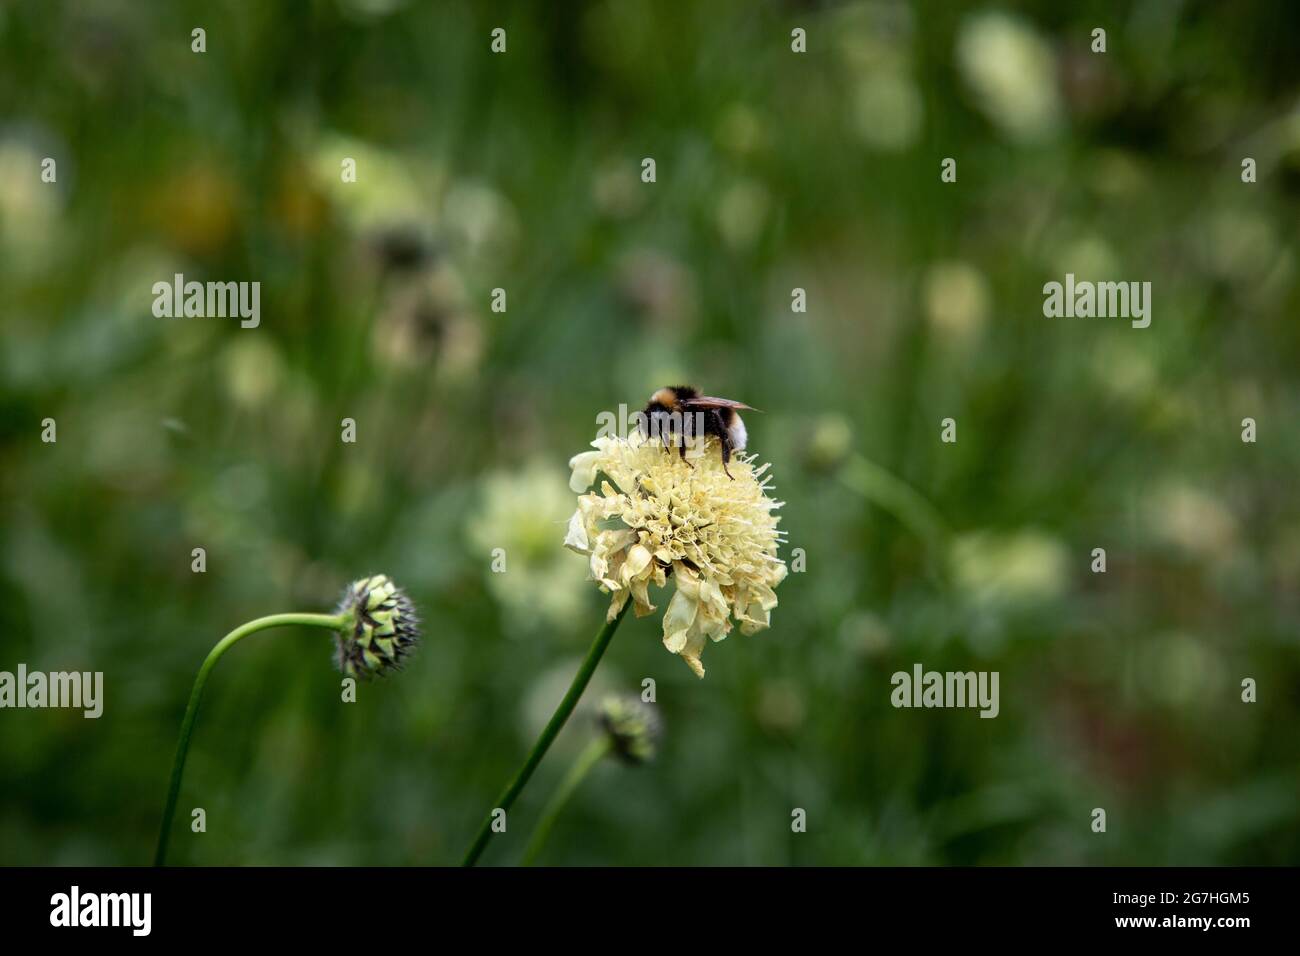 A heath bumblebee (Bombus jonellus) sitting on a Scabiosa columbaria flower, also known as pale yellow scabious at the Chelsea Physics Garden, London, Stock Photo